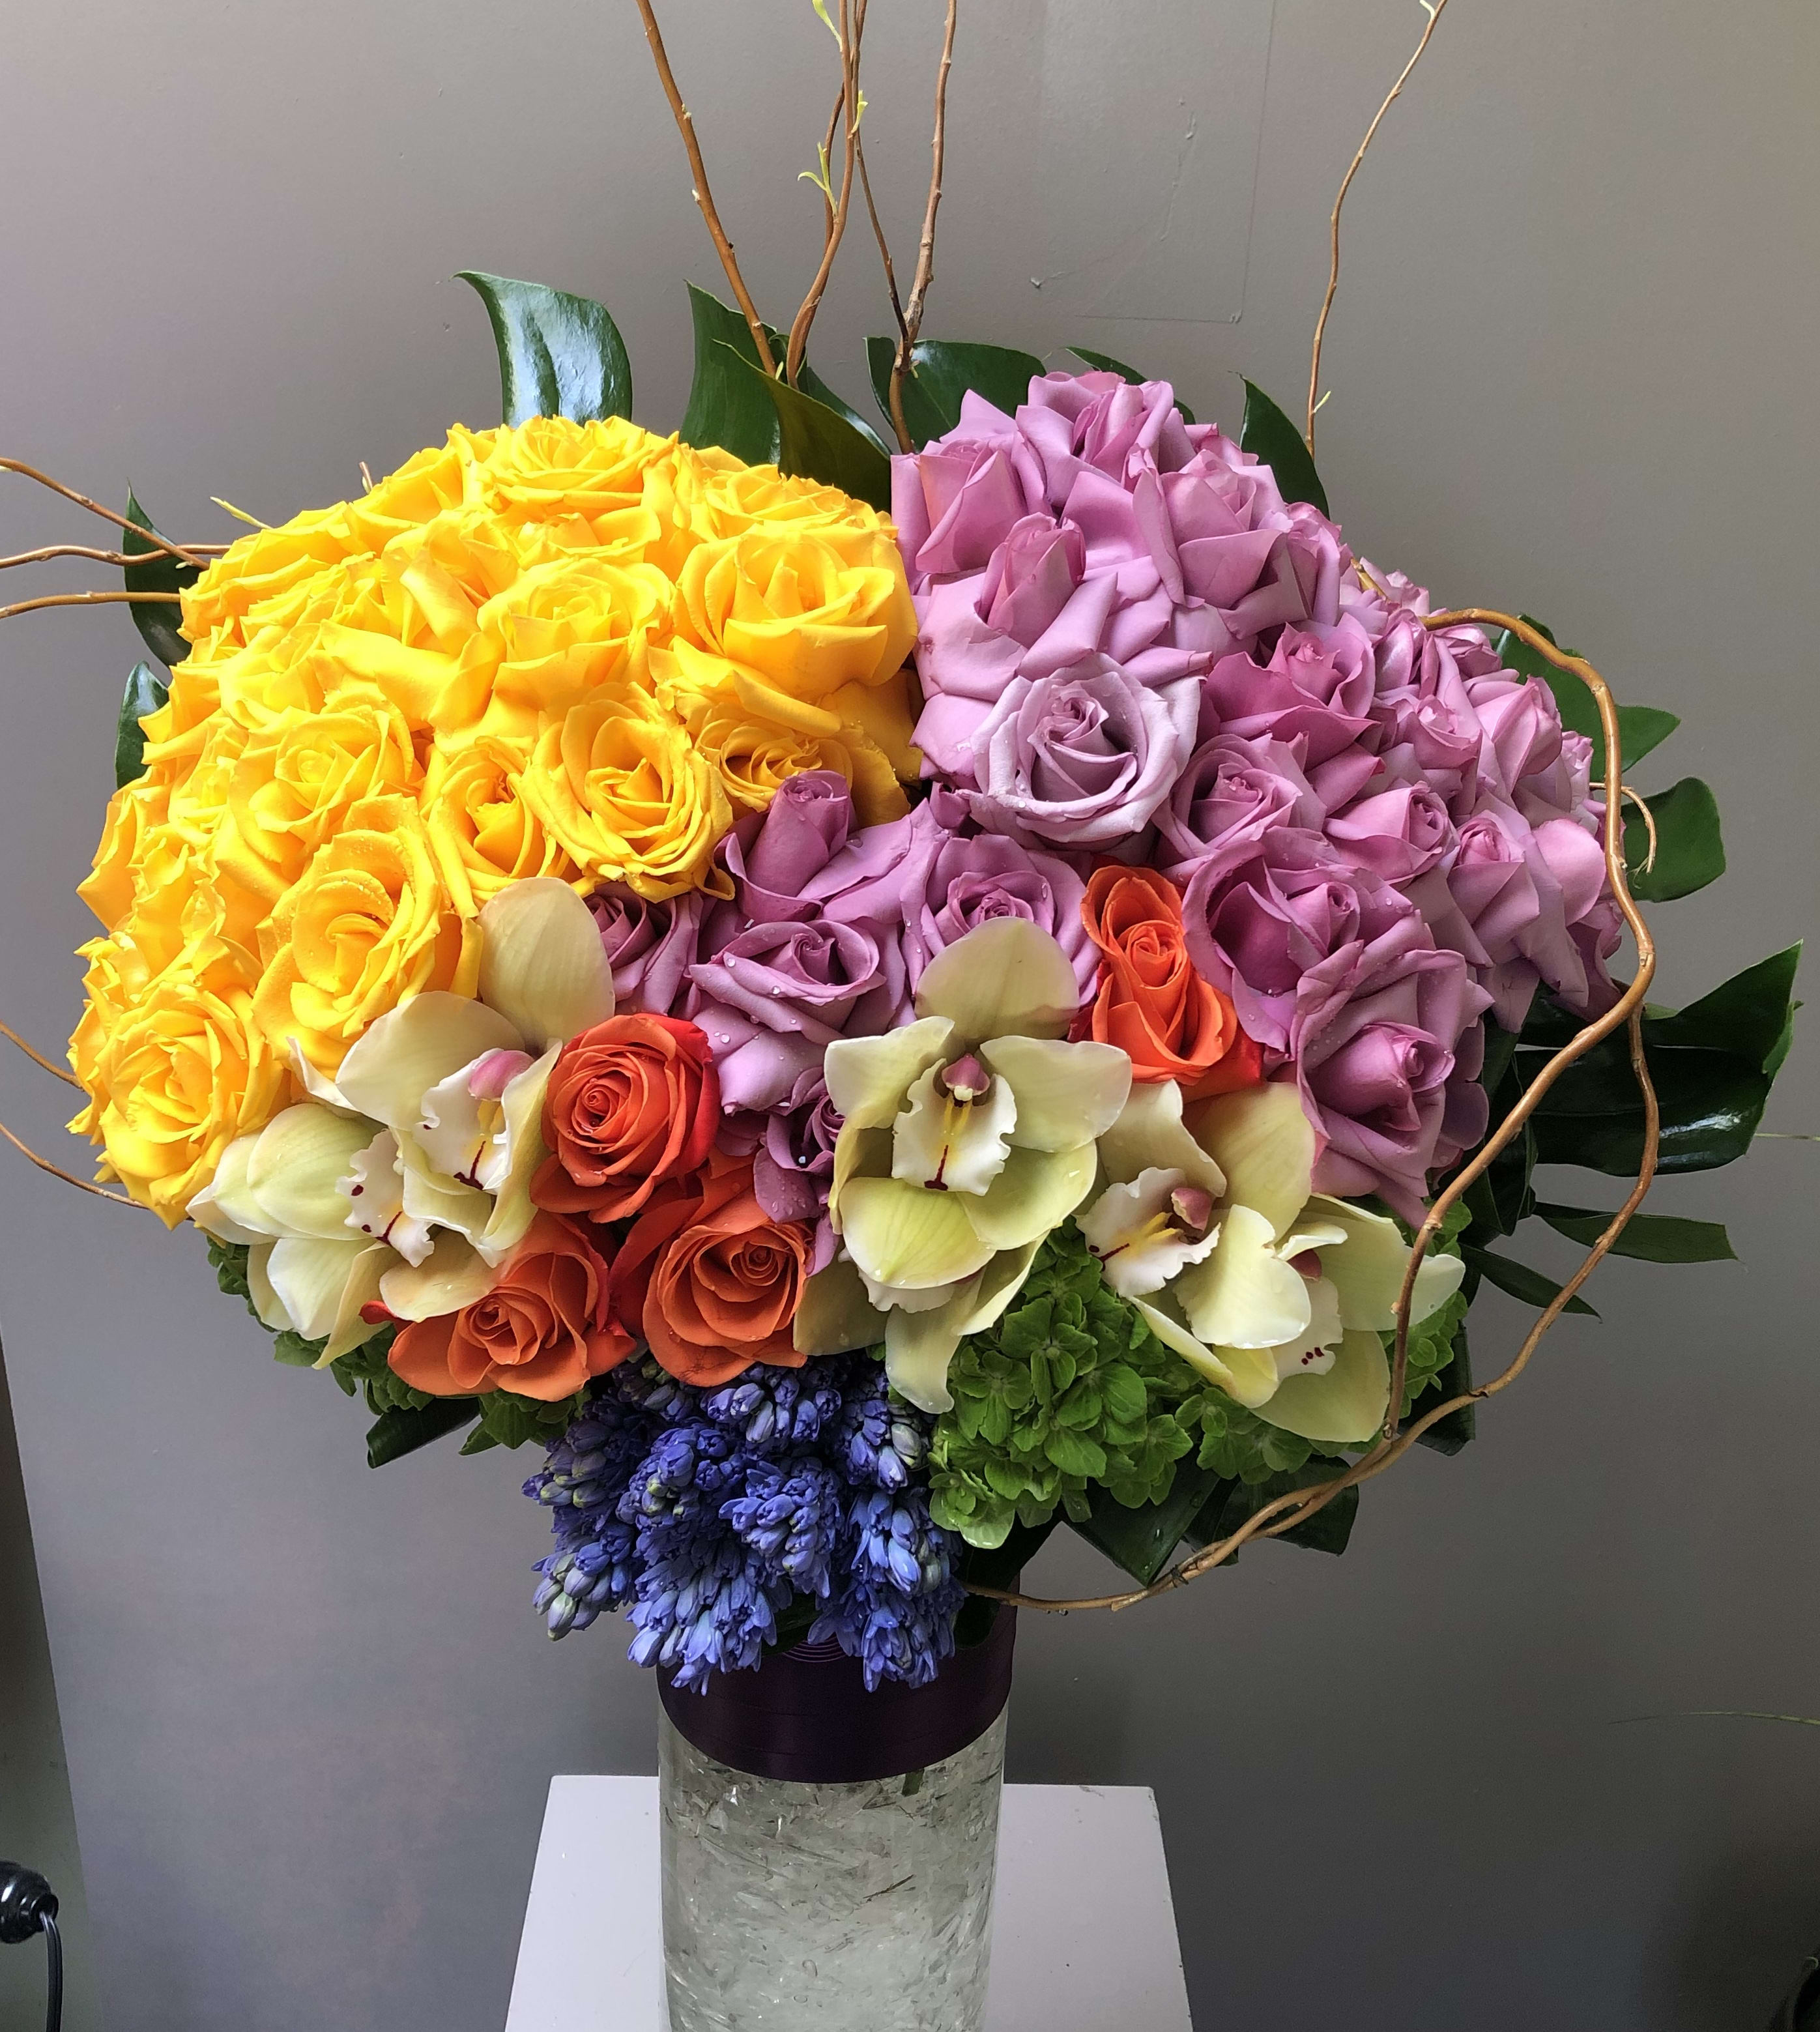 Strong Mixed #EF14 - Grand Colorful Arrangement about 2 dz yellow 2 dz lavender a few orange roses put together with monstera leafs in the back blue hyacinths and orchids in front very cheerful &amp; hapy